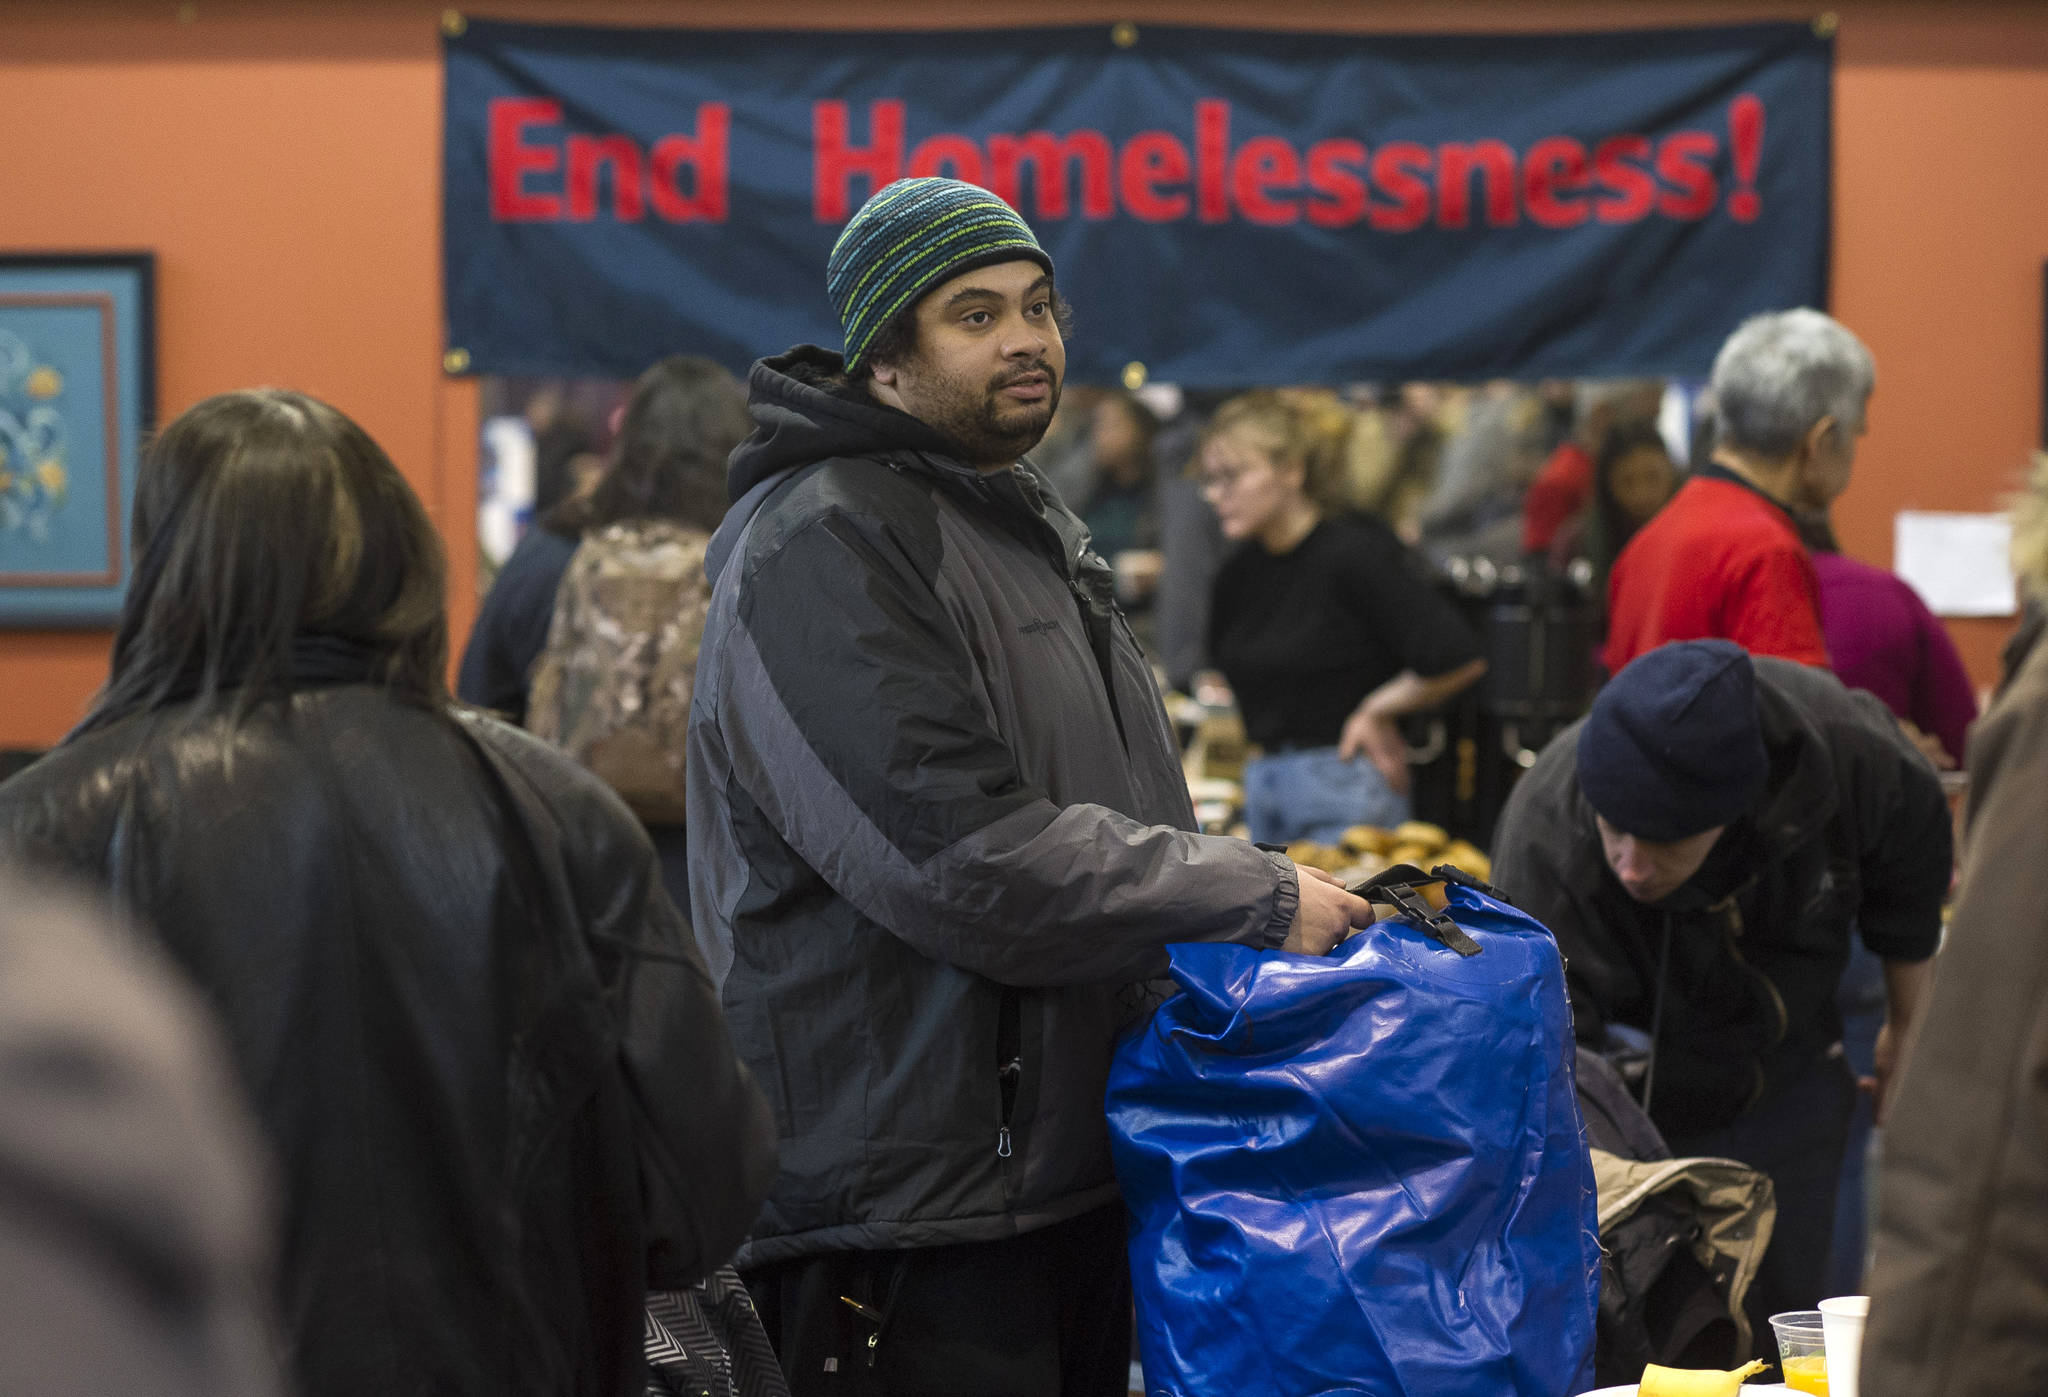 Event brings together perspectives on homelessness